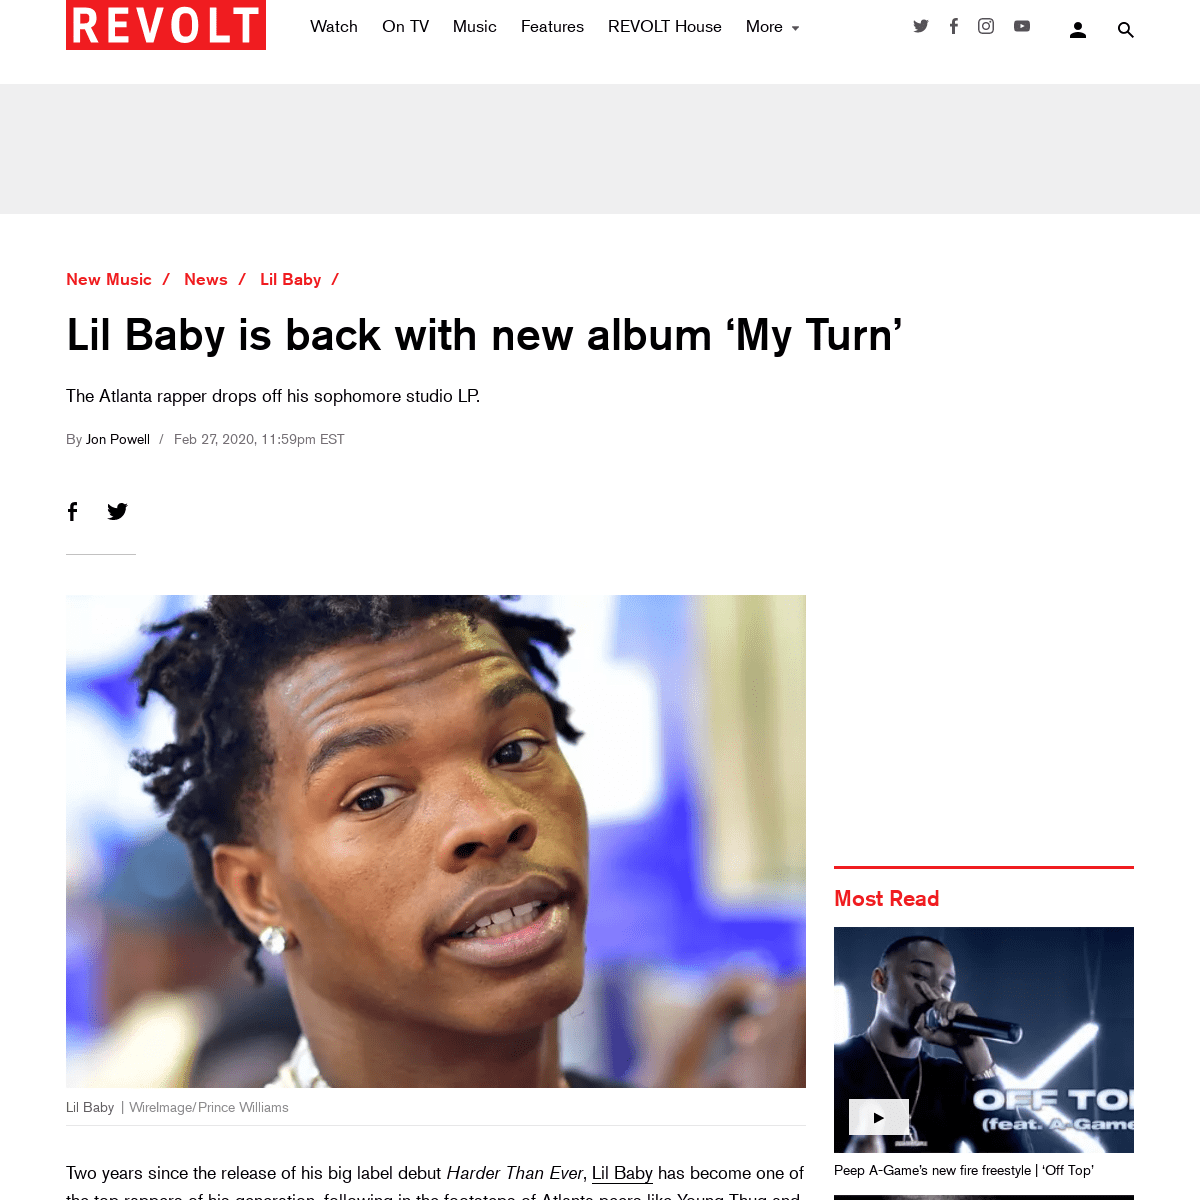 A complete backup of www.revolt.tv/new-music/2020/2/27/21156571/lil-baby-my-turn-album